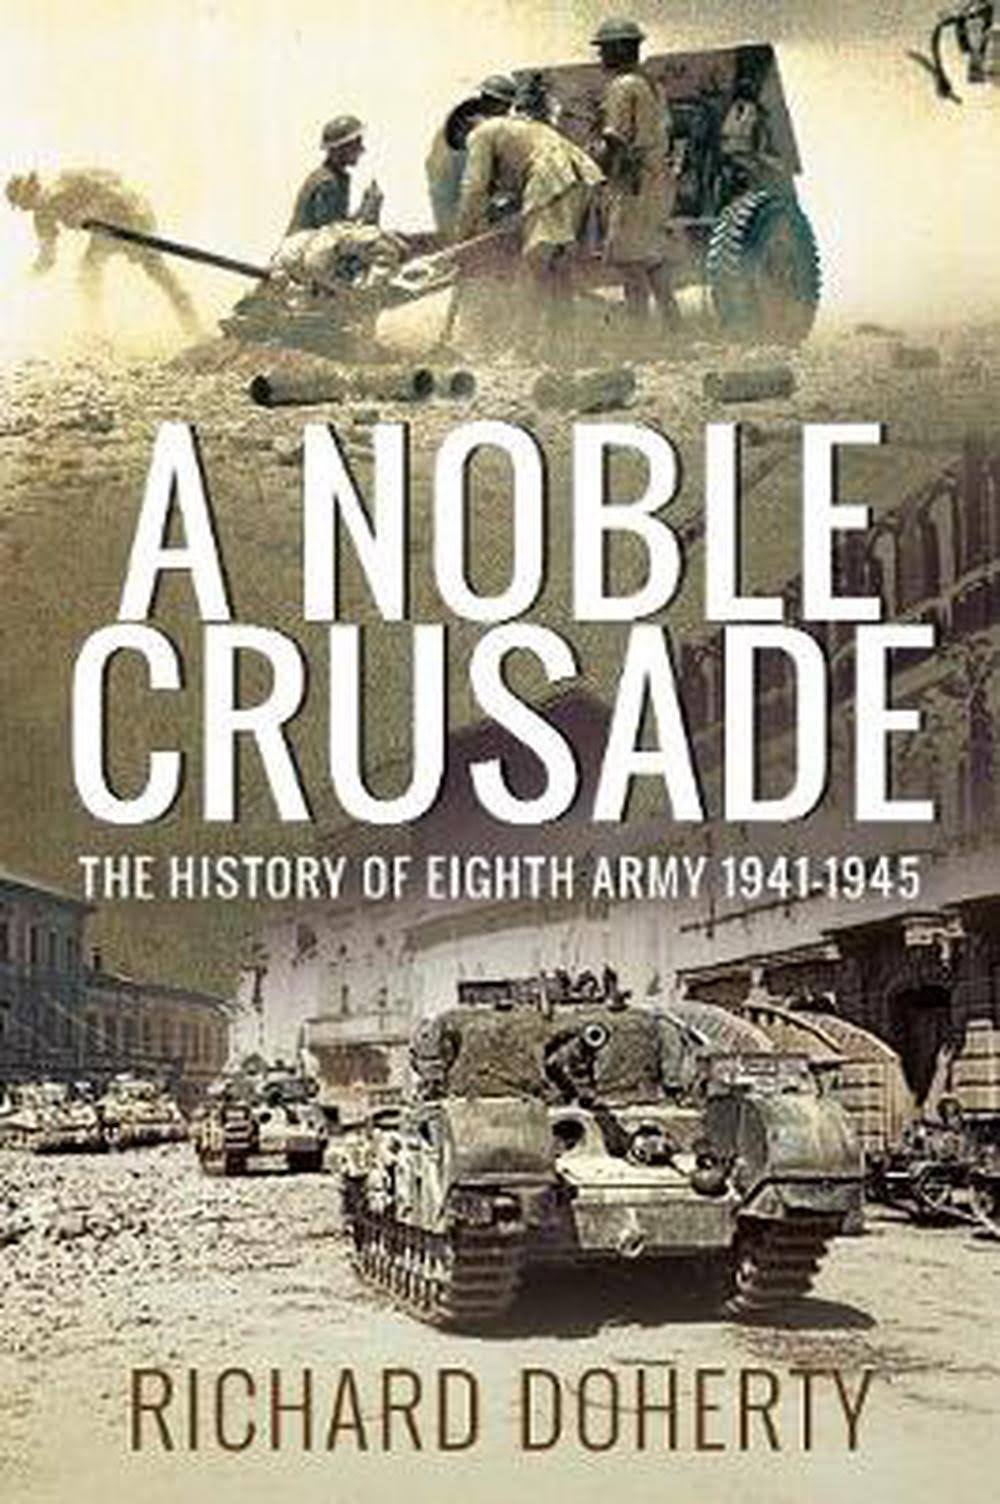 A Noble Crusade by Richard Doherty